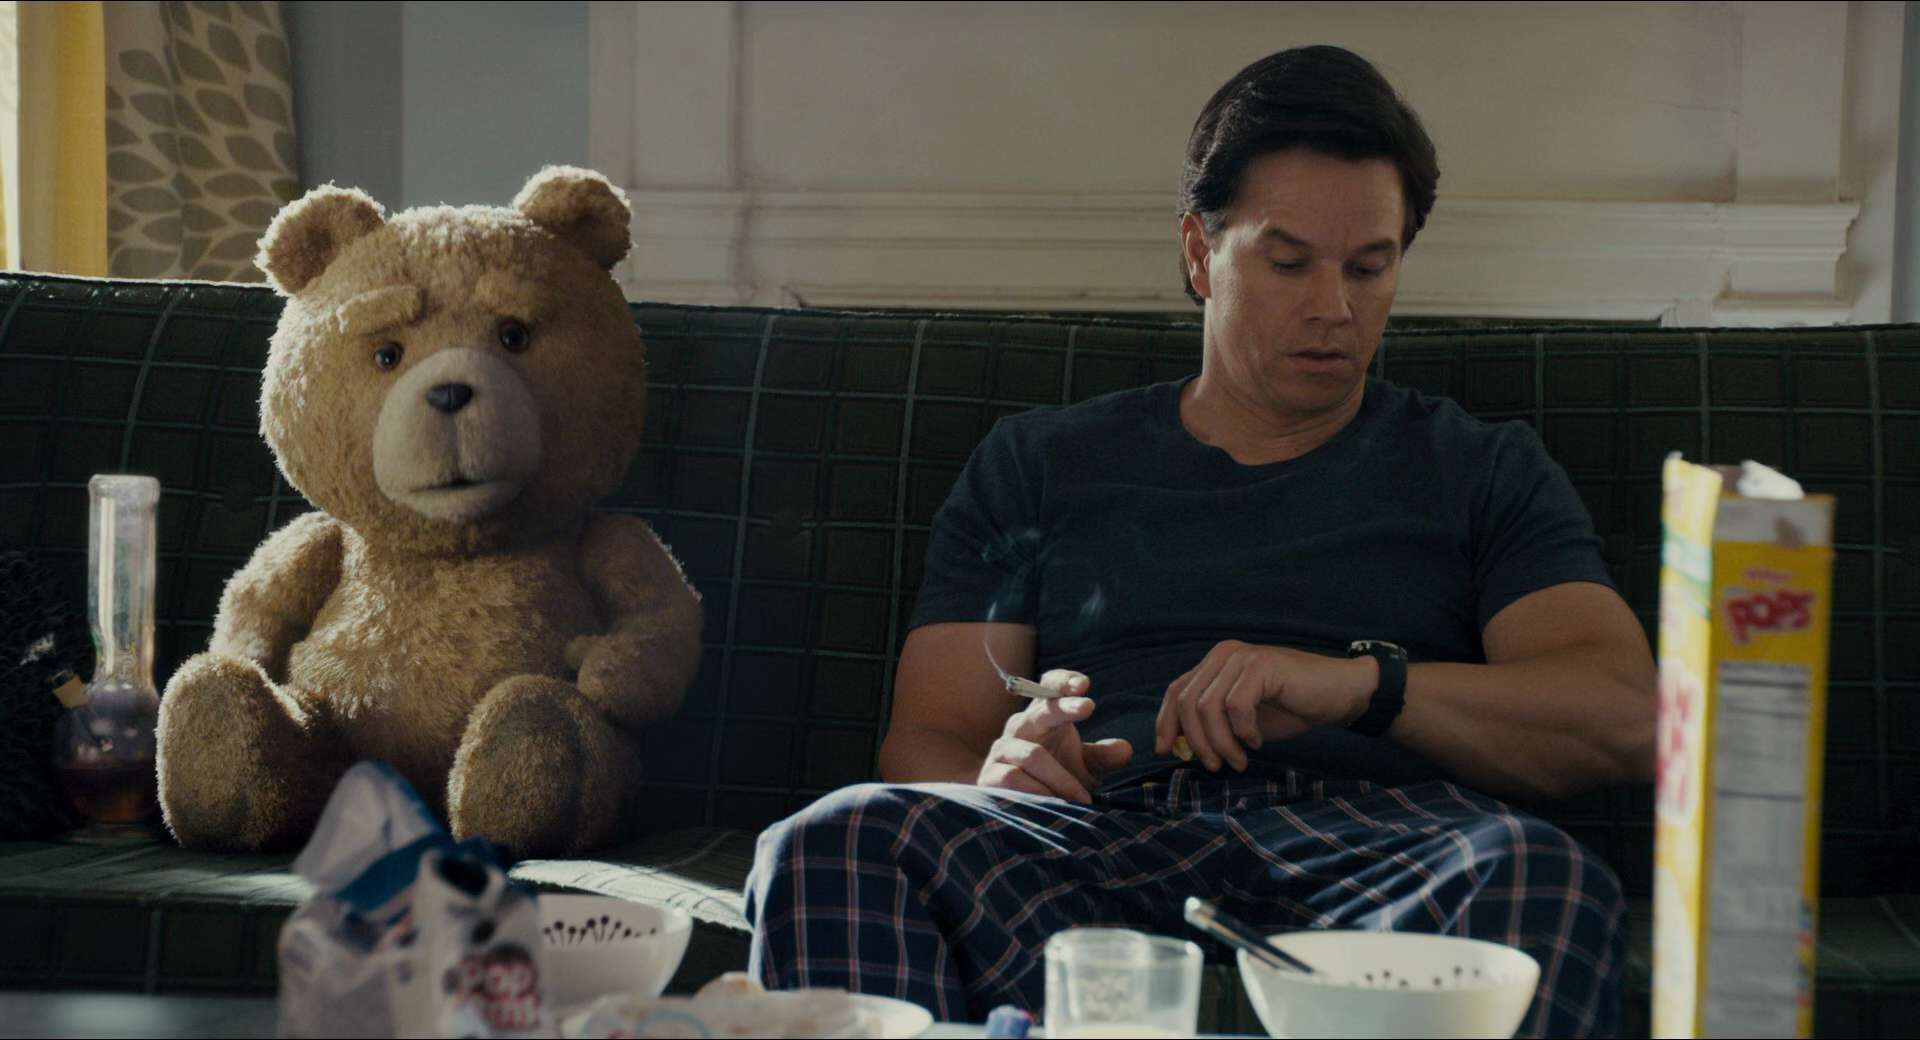 ted movie 2012 download kickass torrent